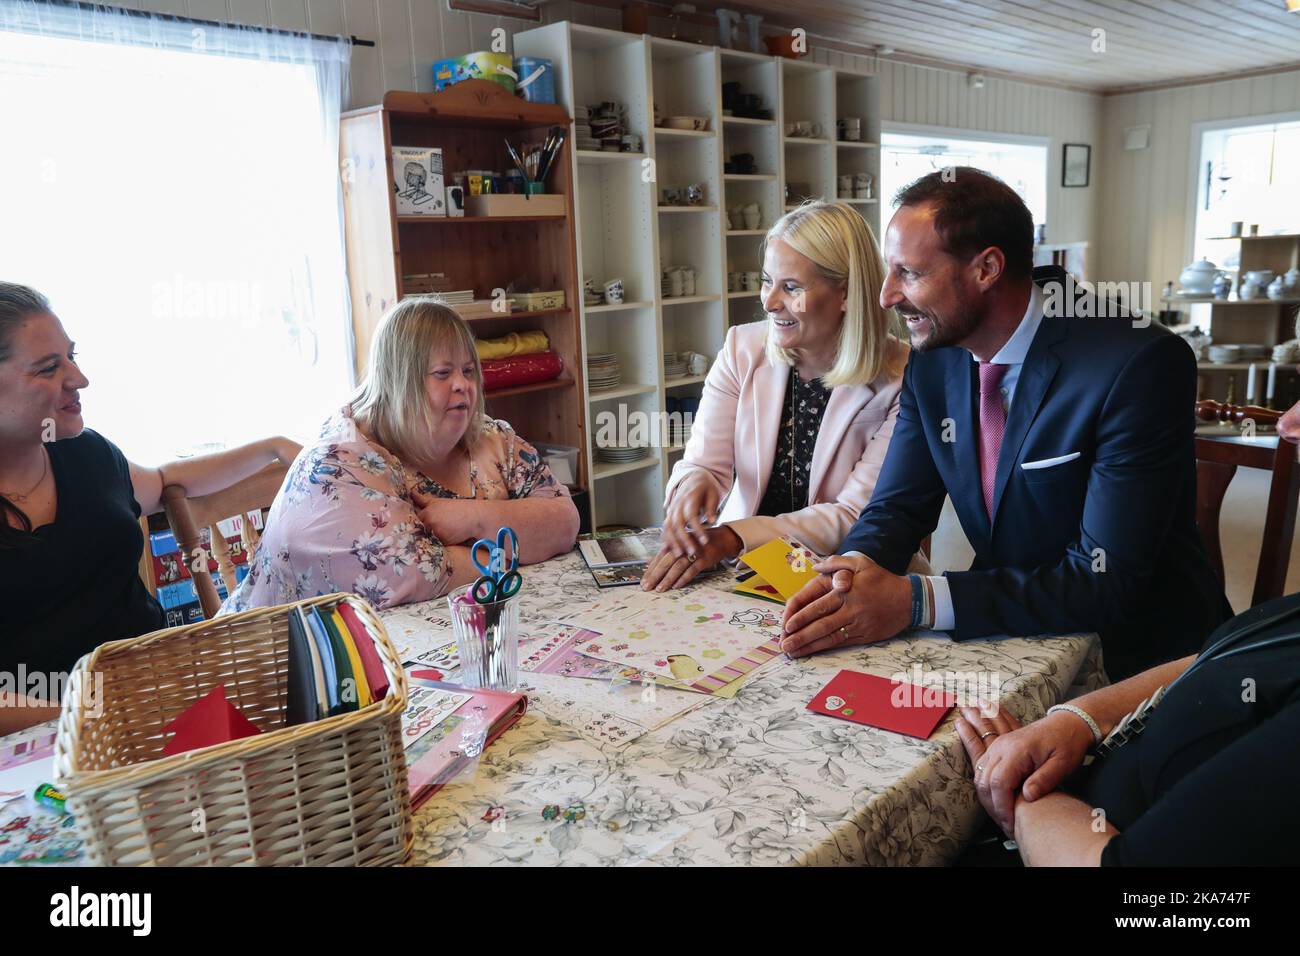 Svelvik, Norway 20180904. Crown Prince Haakon and Crown Princess Mette-Marit visit Vestfold from 4 to 6 September. In Svelvik, the Crown Prince Couple greeted the users of the Svelvik Training and Activity Center. POOL Photo: Lise Aaserud / NTB scanpi Stock Photo